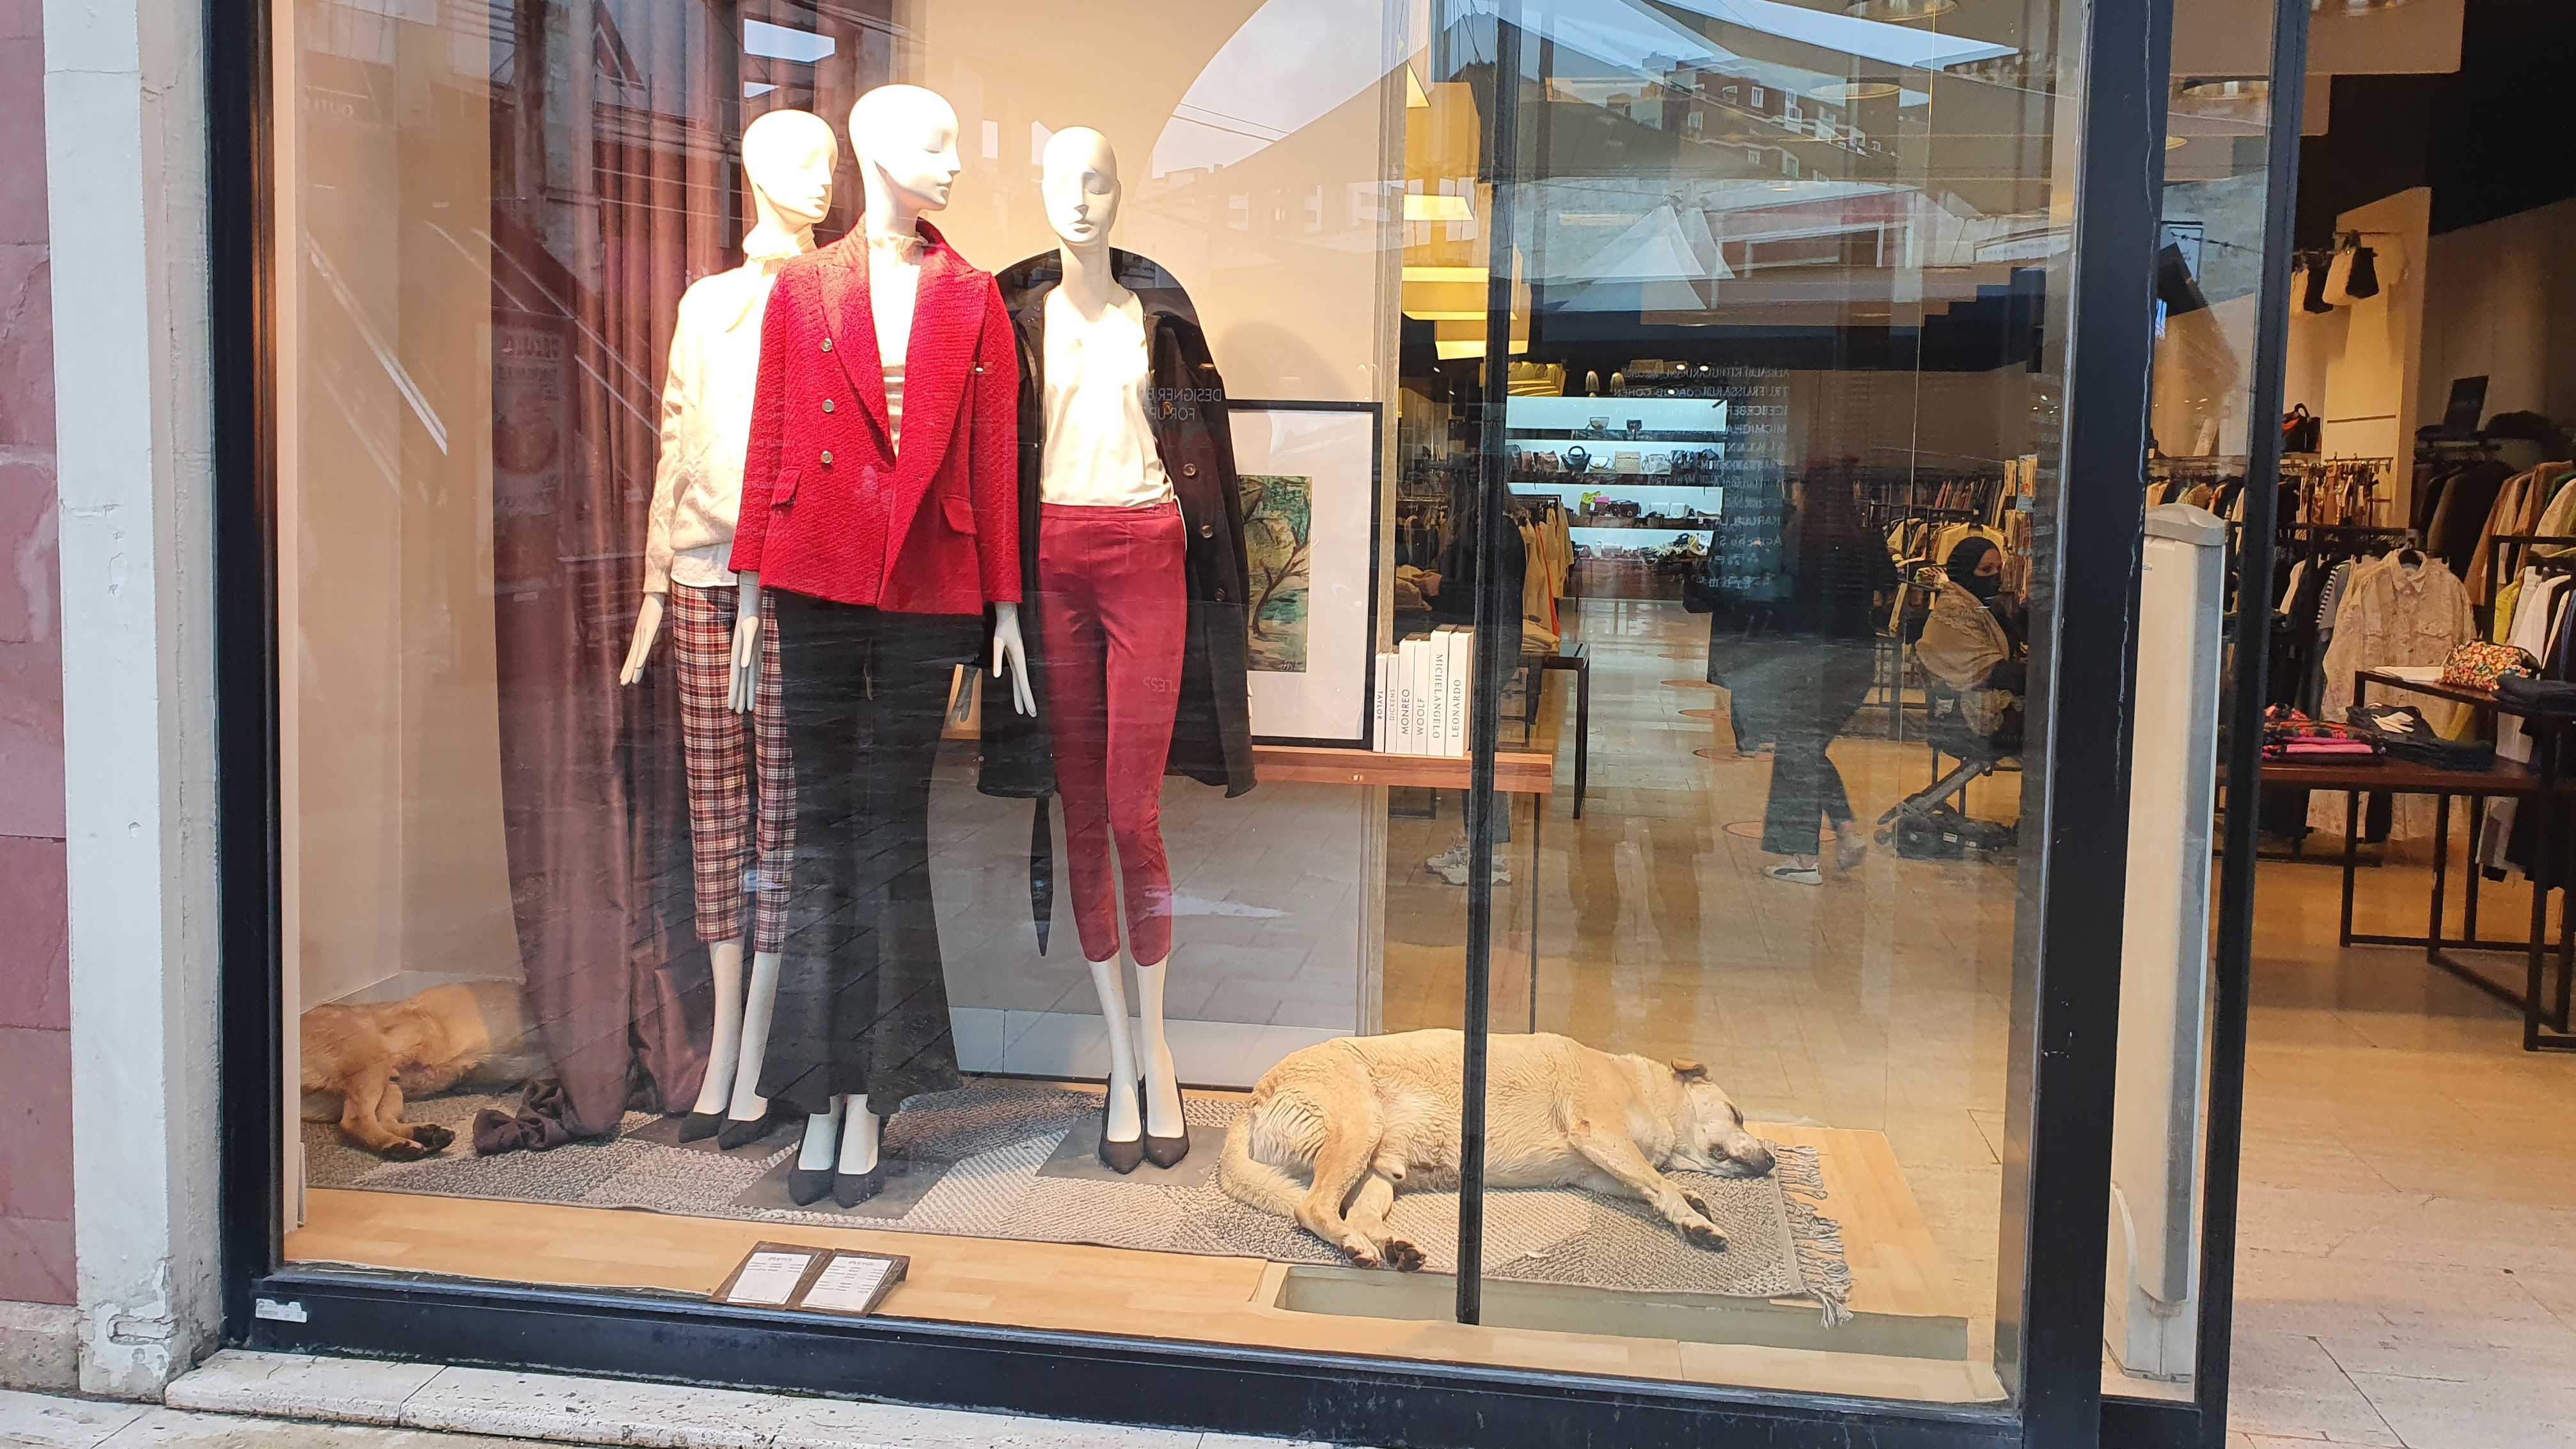 Stray dogs sleeping in a boutique shop front, Istanbul (photo: Ayse Karabat)